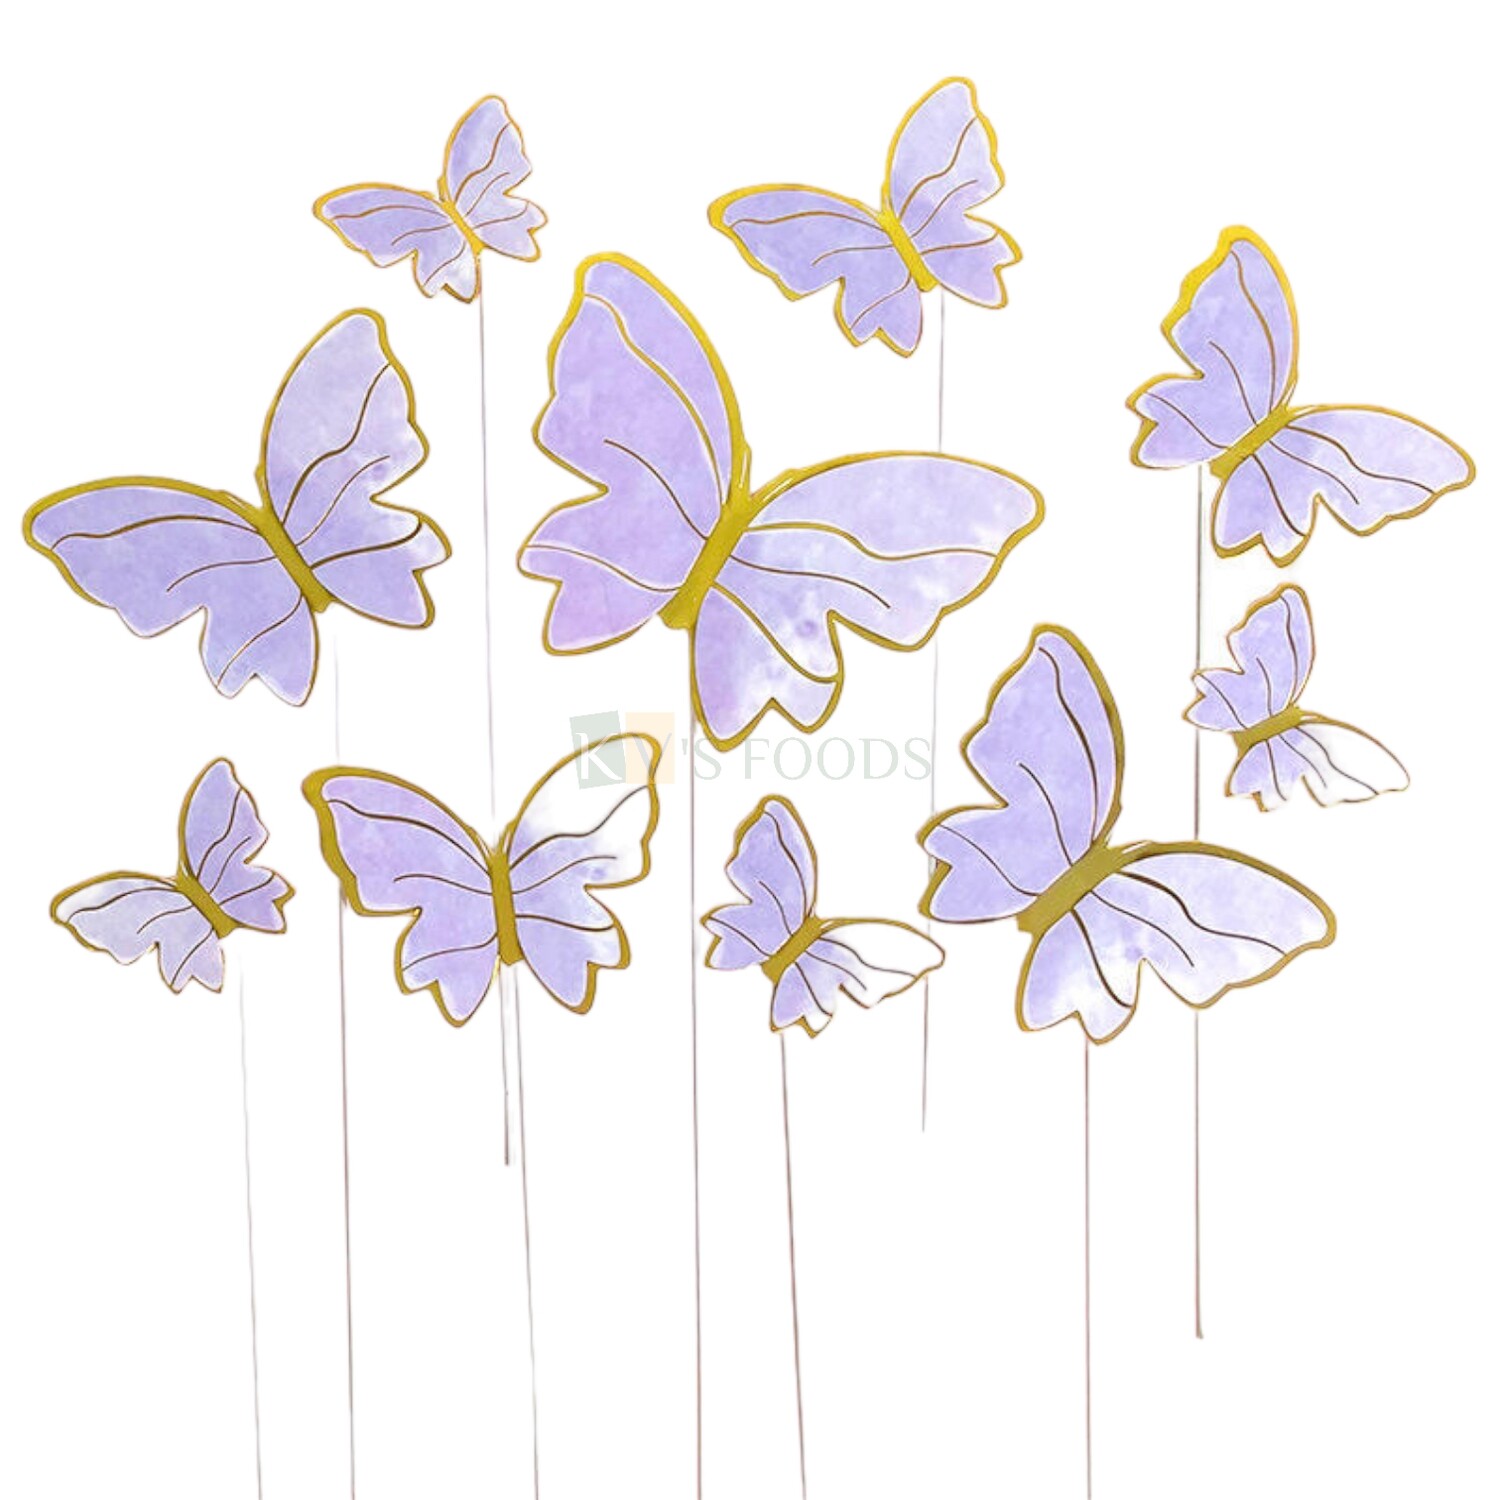 10 PCS Purple Gold Hard Paper Butterfly Cake Toppers, Cake Topper Insert, Cake Topper, Cupcake Toppers, Girls, Boys, Friends Bday Decorations Items/Cake Accessories, Tags, Cards, Cake Toothpick Topper